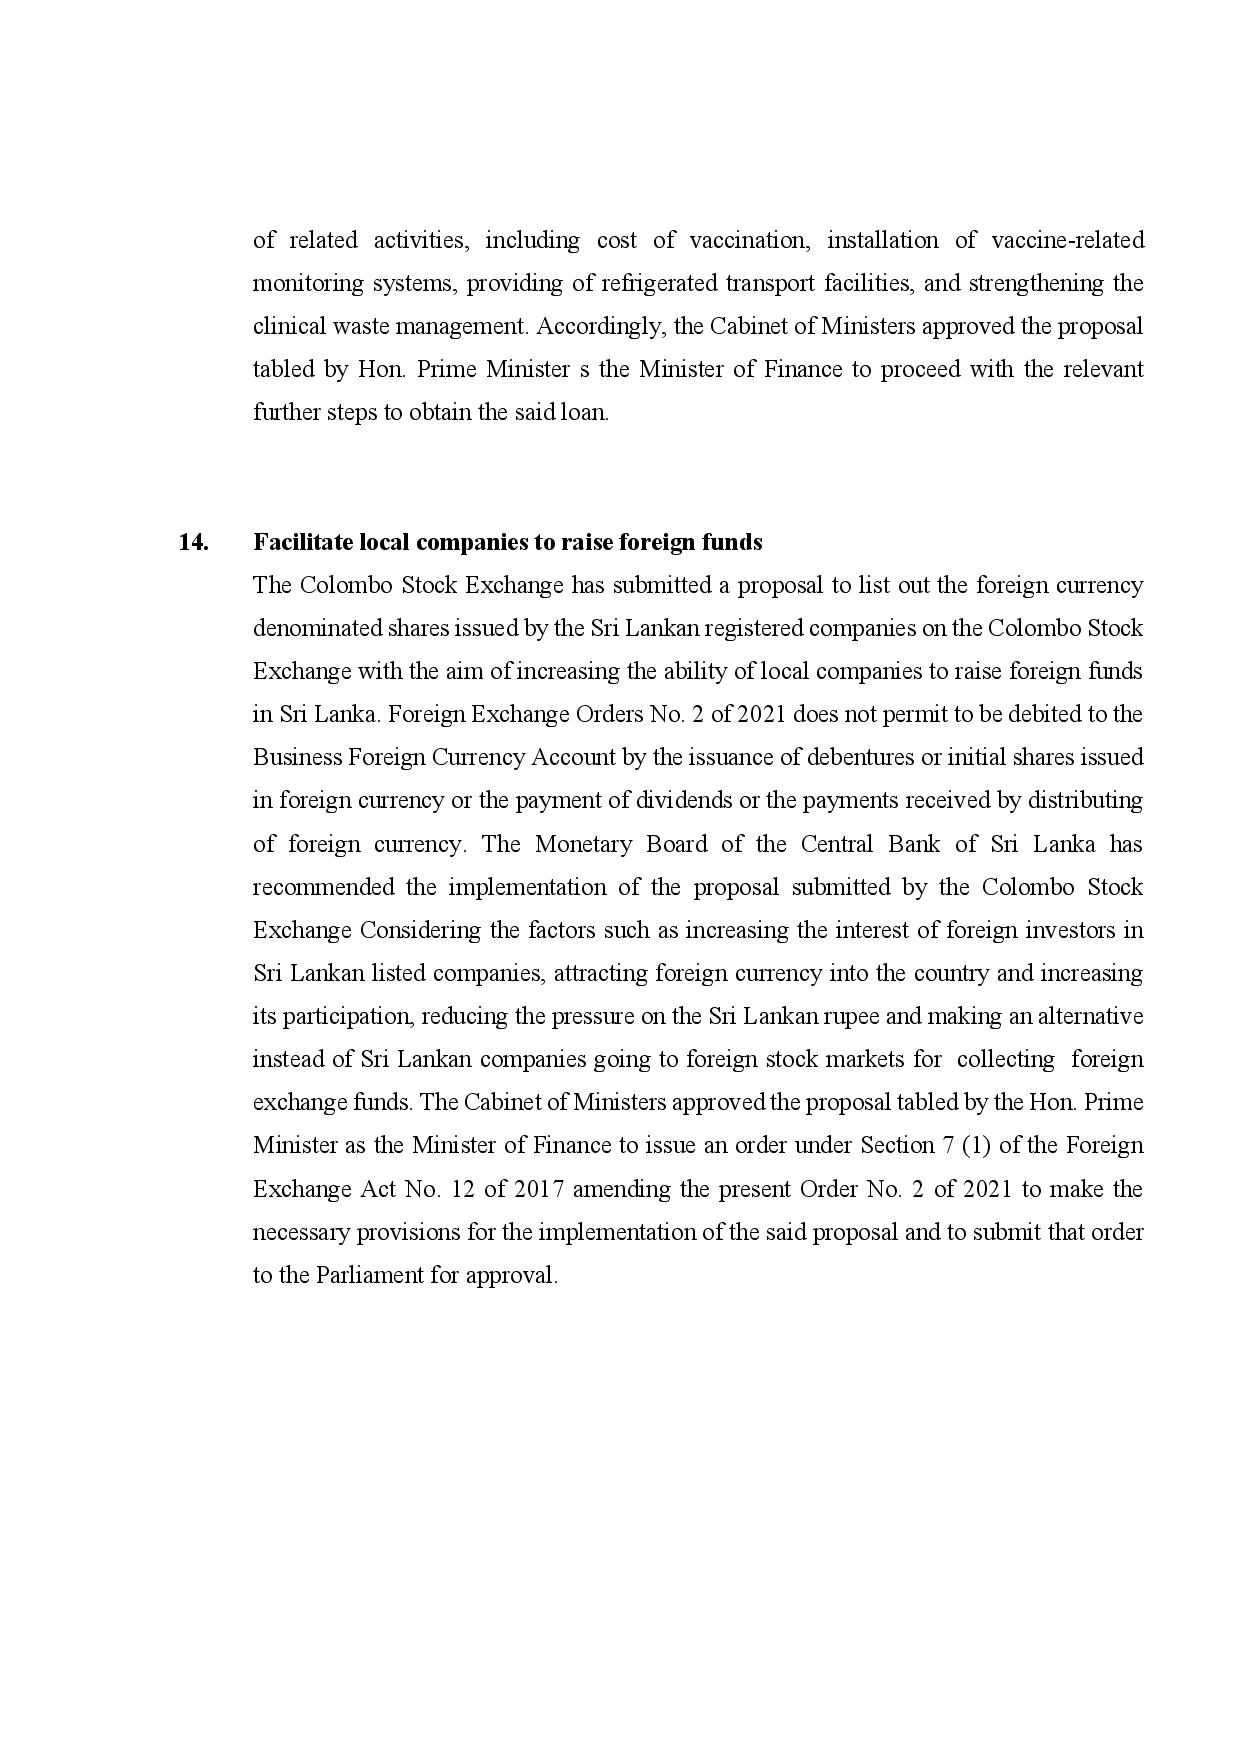 Cabinet Decision on 28.06.2021 English page 007